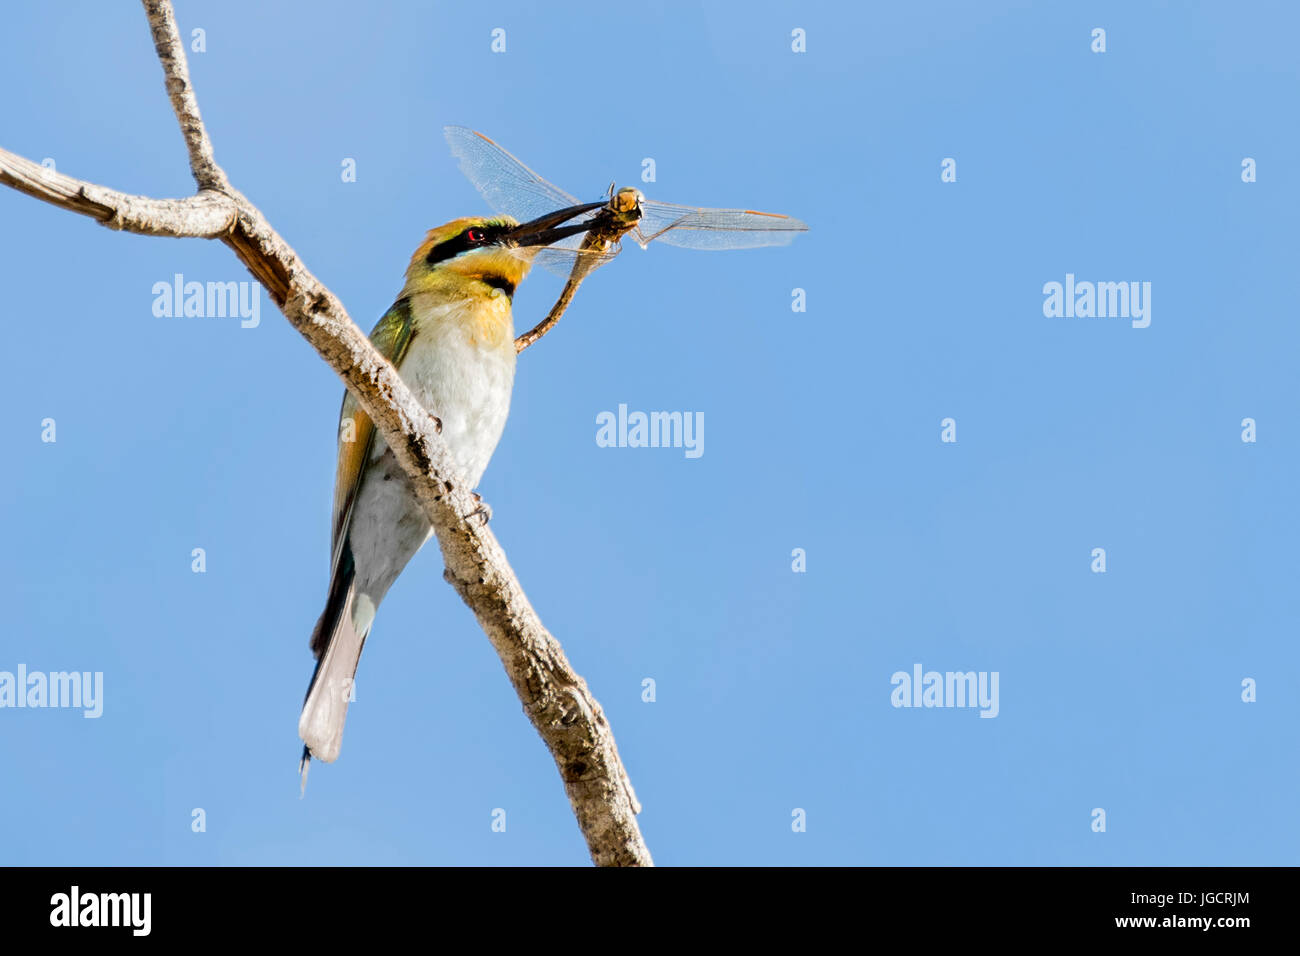 Bee eater bird with an insect in its beak, Australia Stock Photo